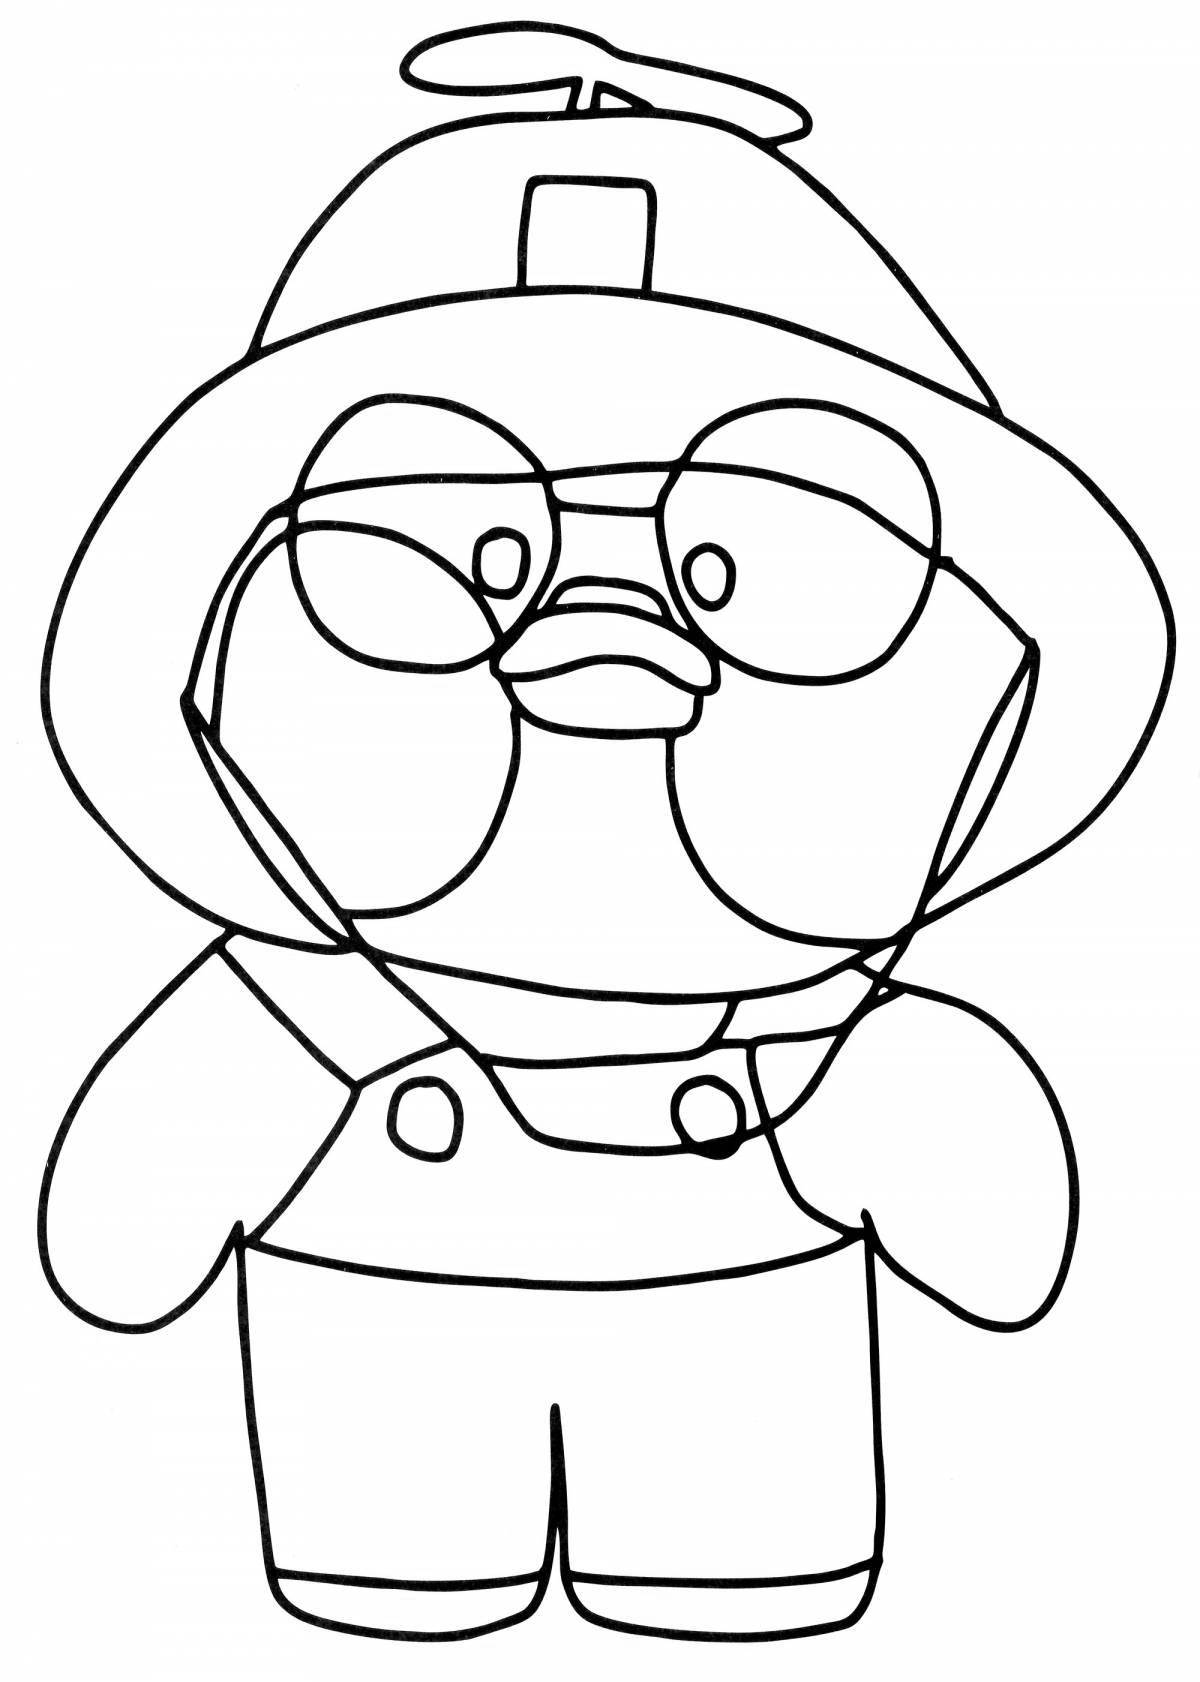 Amazing lalafanfan duck coloring page for kids